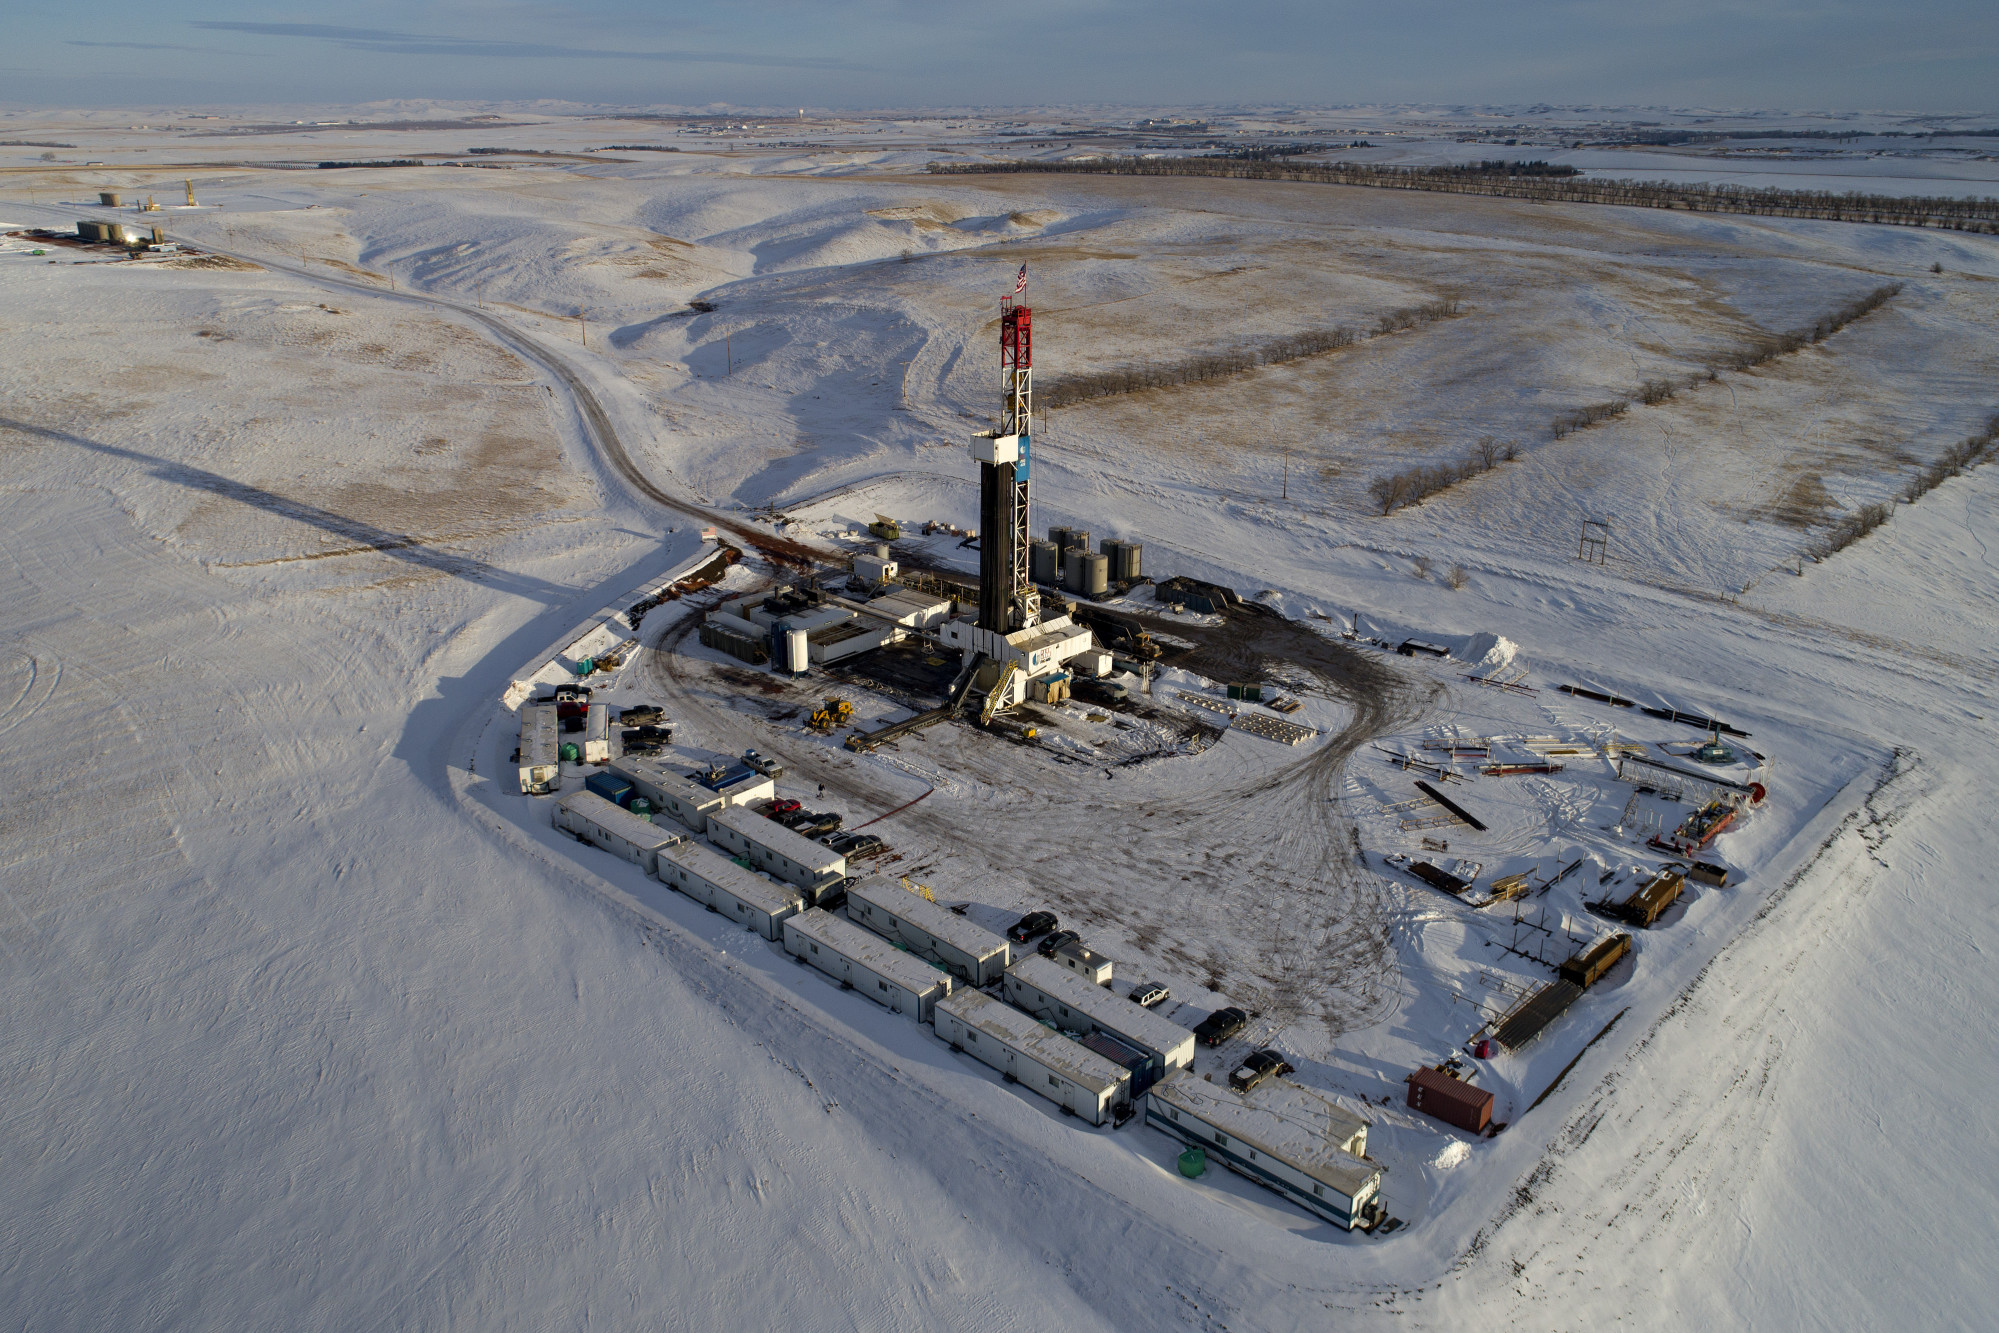 oil drilling in the tundra